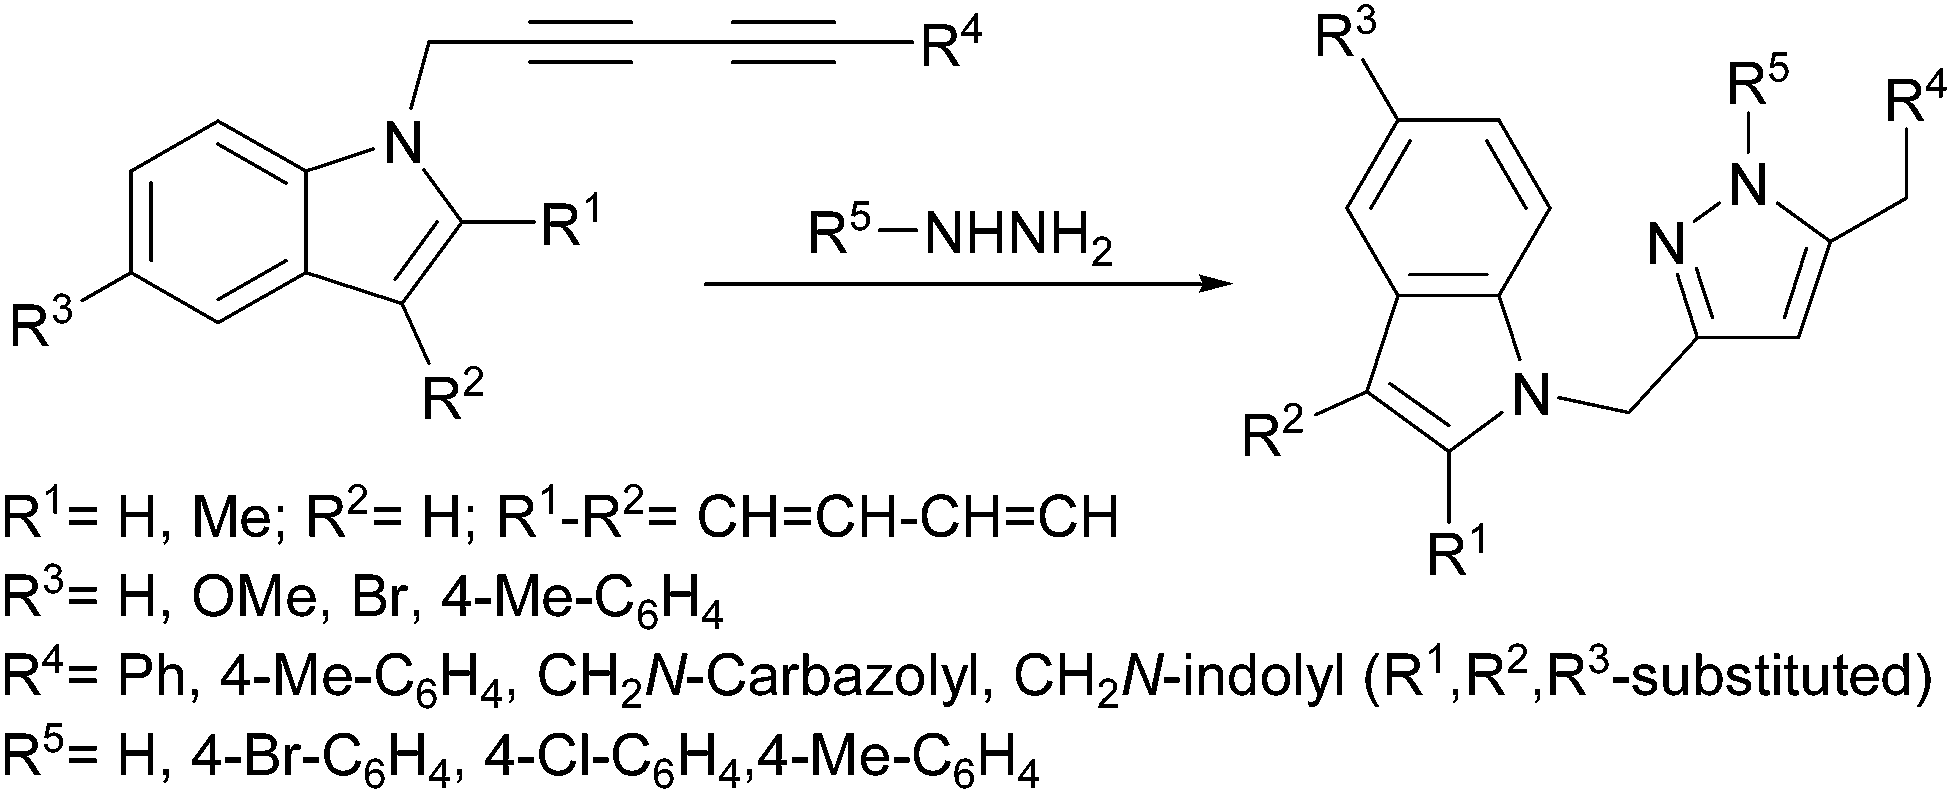 Metal-free synthesis of 3,5-disubstituted 1 H - and 1-aryl-1 H